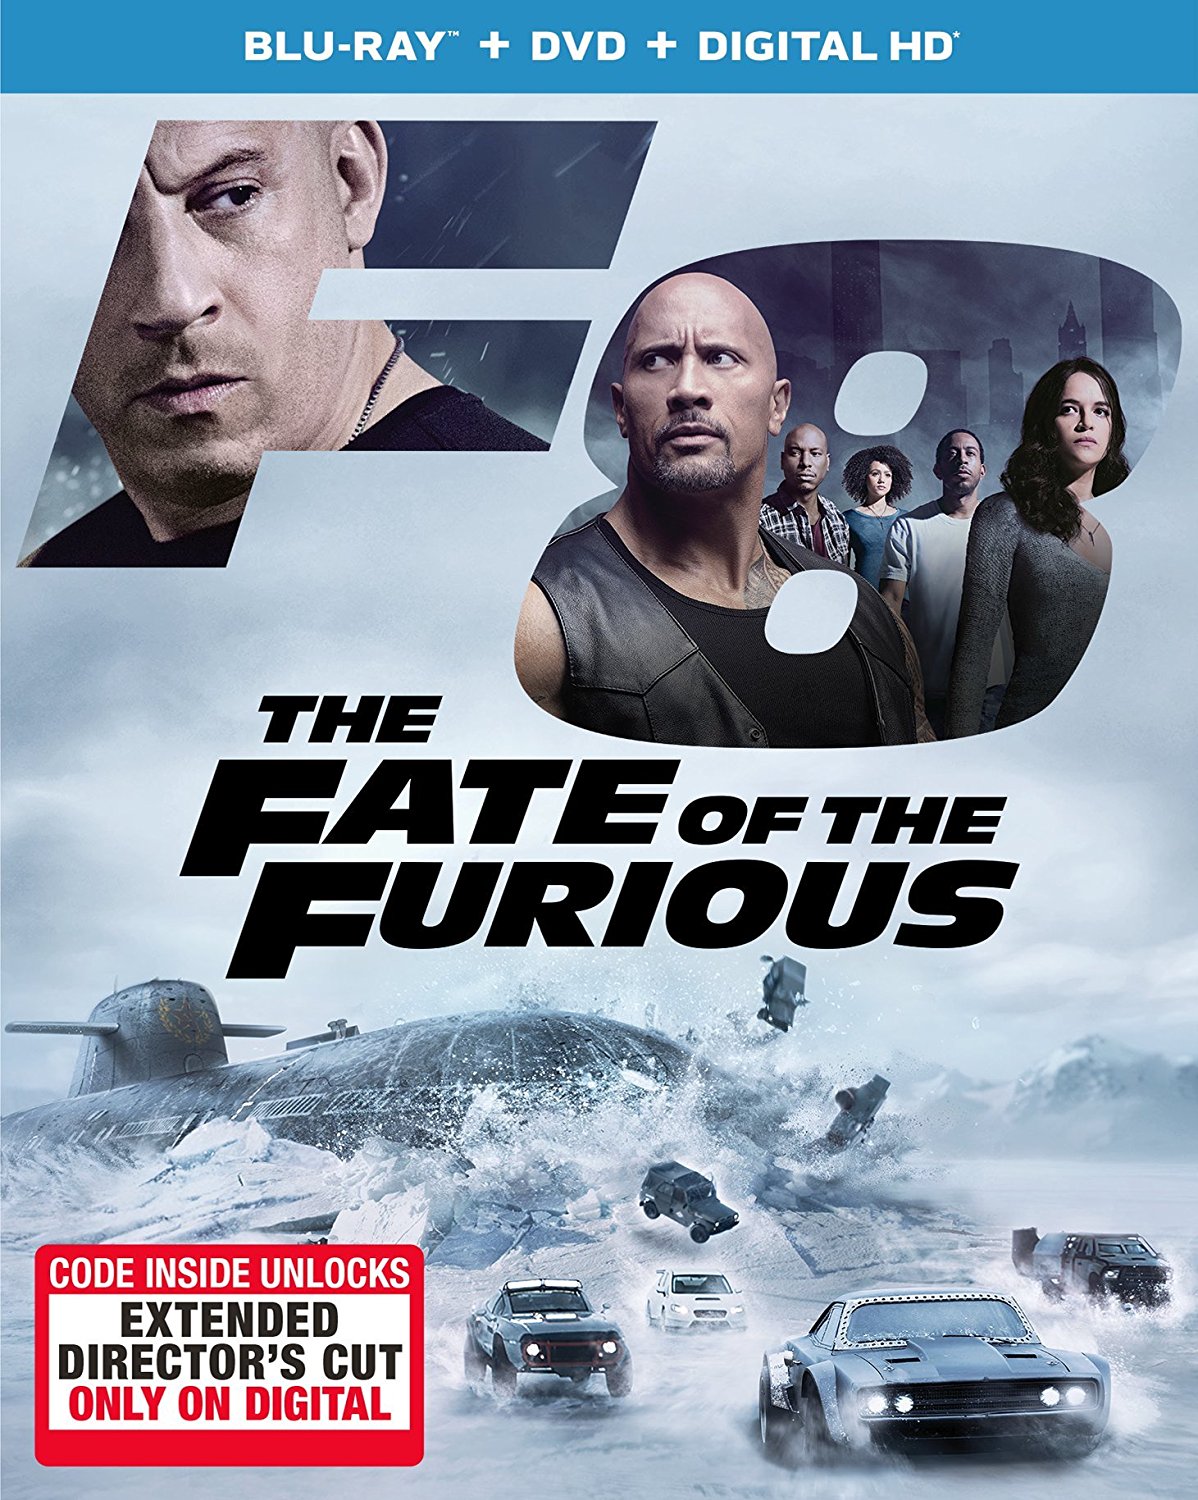 The Fate of the Furious on Blu-ray – Just $19.96!